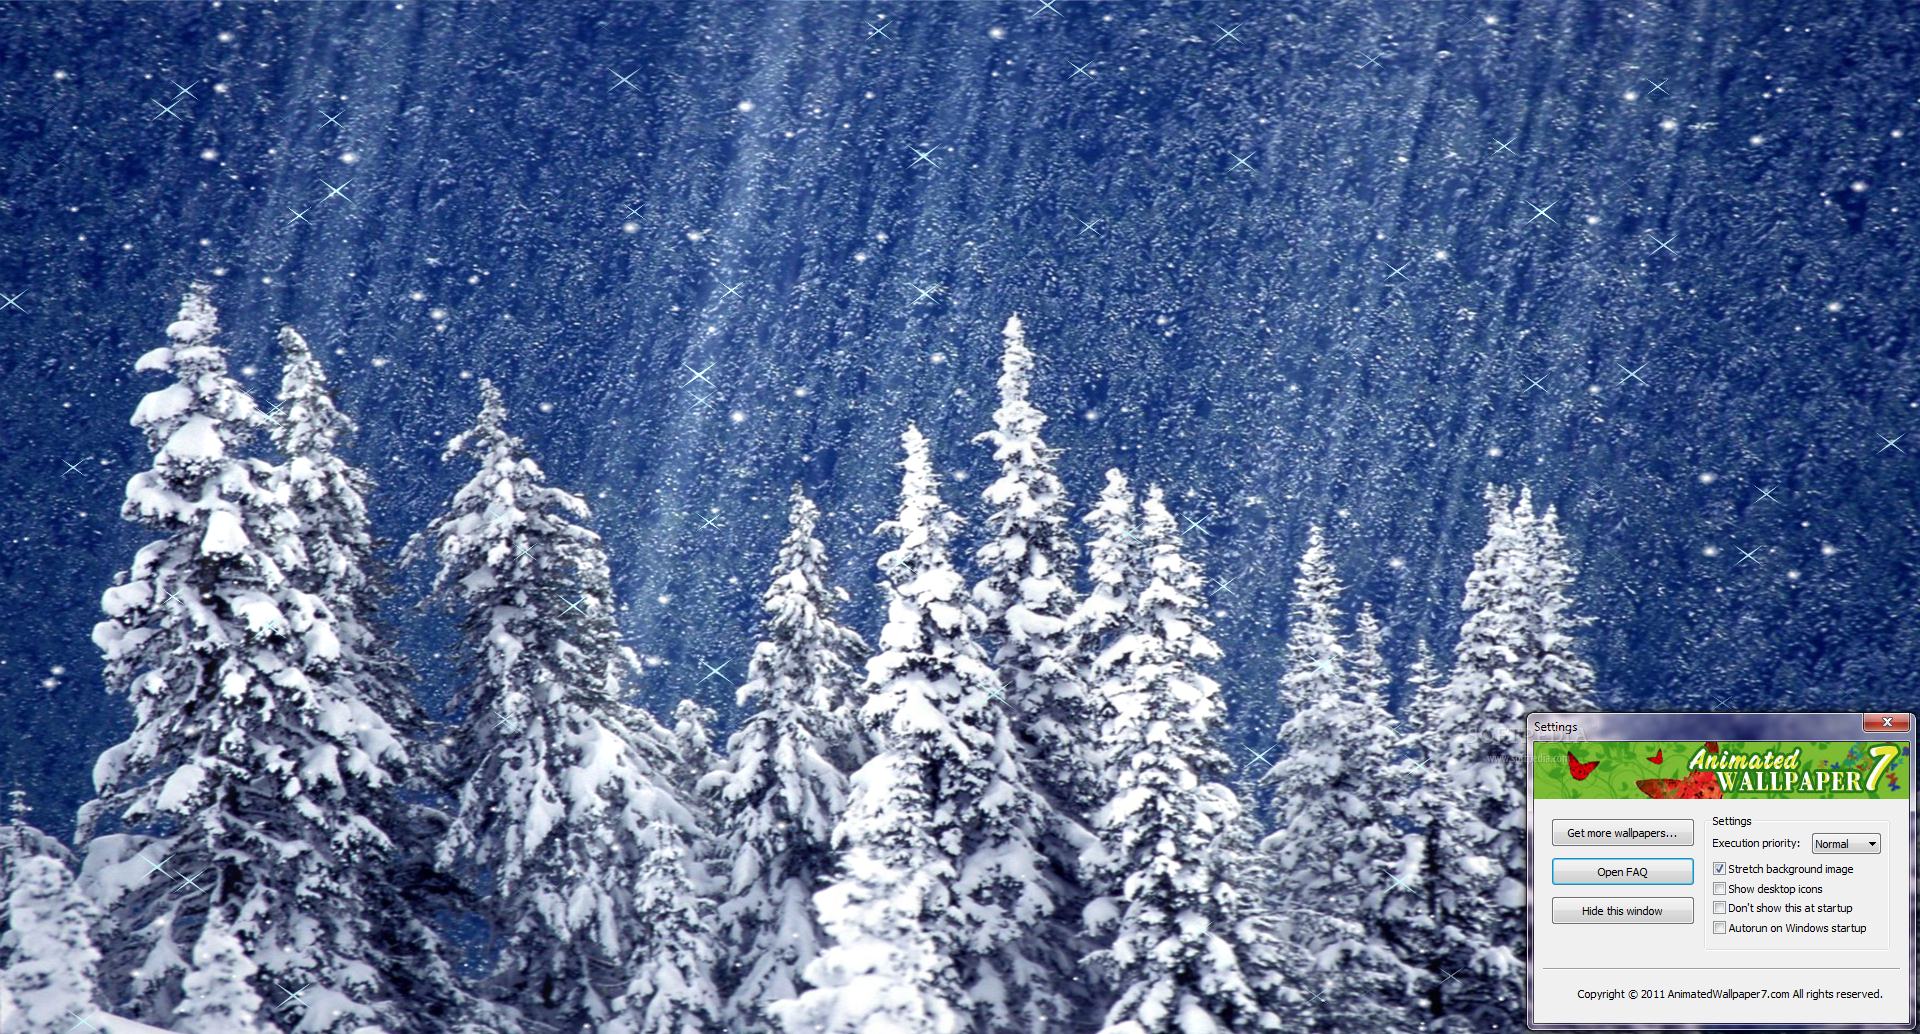 Snow Animated Wallpaper Depicts A Unique Scene With Trees On Top